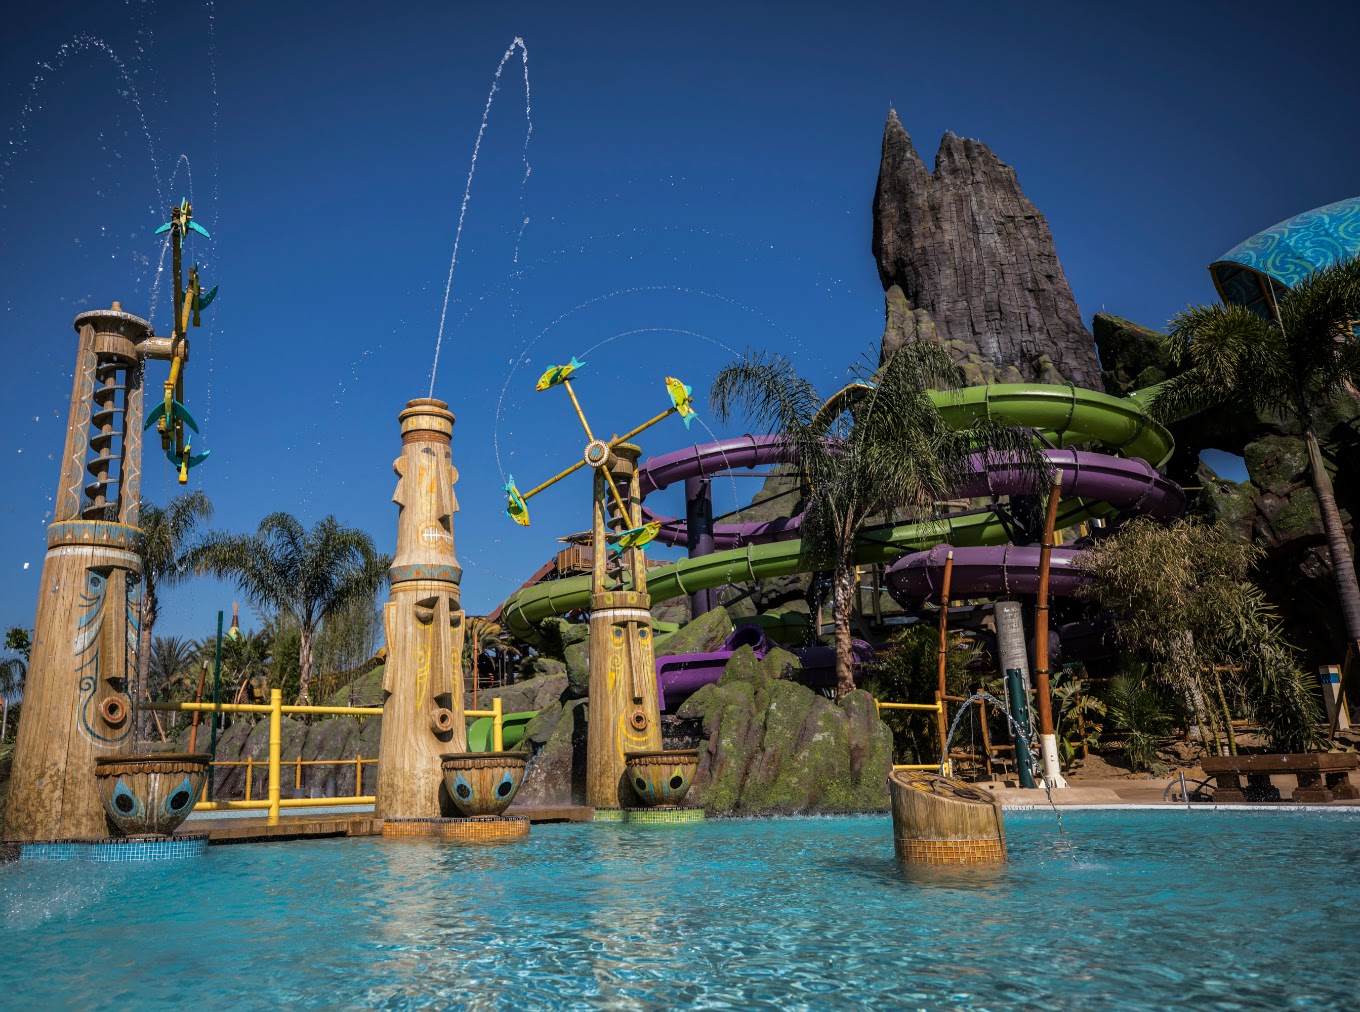 Enjoy 13 insider tips for planning your Universal's Volcano Bay water theme park trip, including what to know before you go about TapuTapu wearables